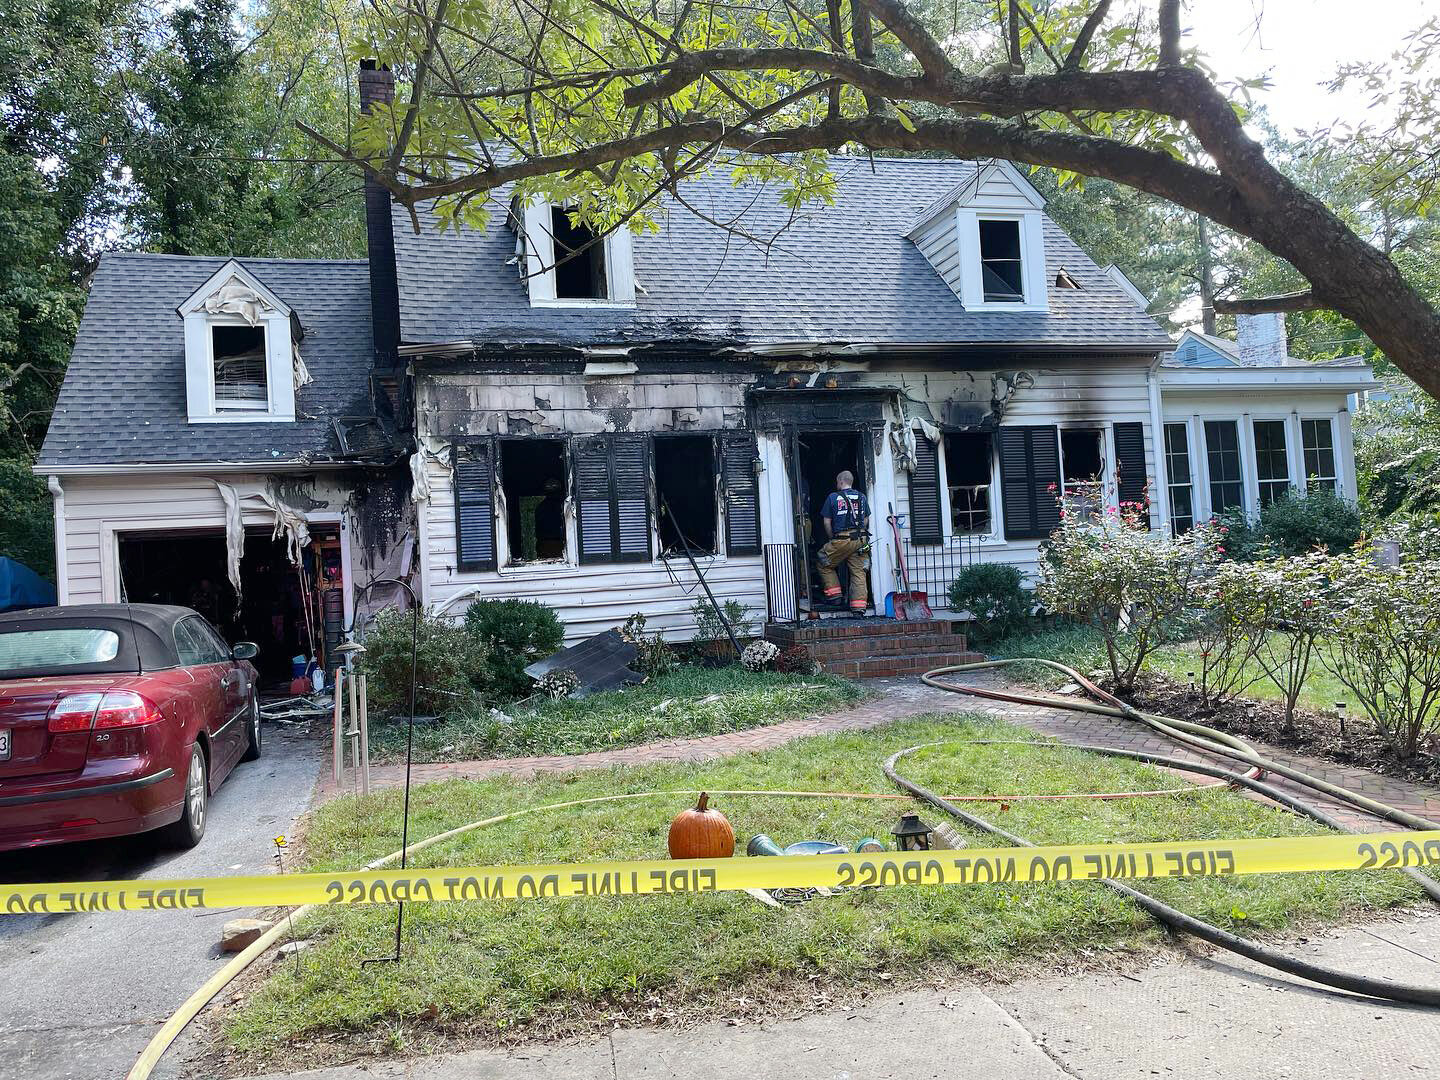 The Pinehurst neighborhood home of Salisbury University lacrosse coach Jim Berkman was destroyed by fire early Sunday, the Maryland State Fire Marshal’s Office said.